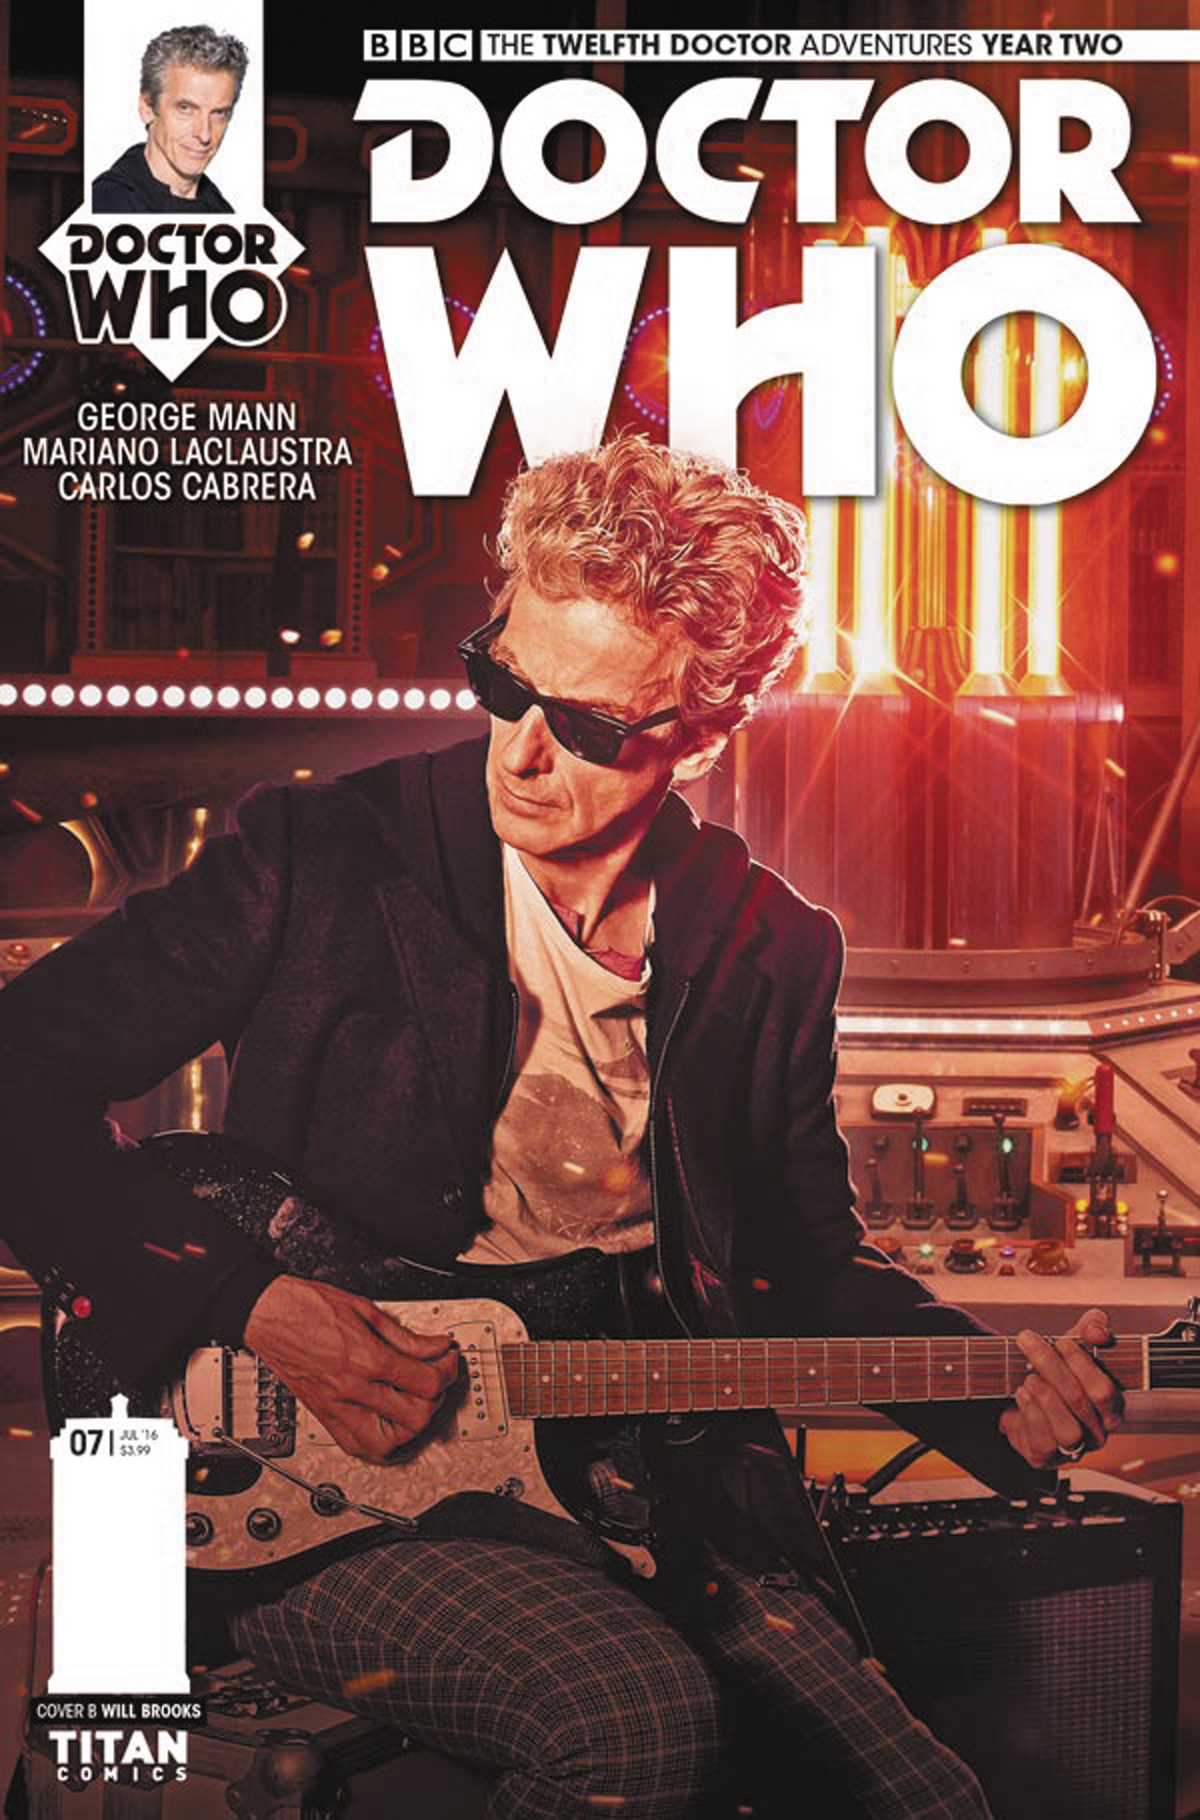 DOCTOR WHO 12TH YEAR TWO #7 CVR B PHOTO